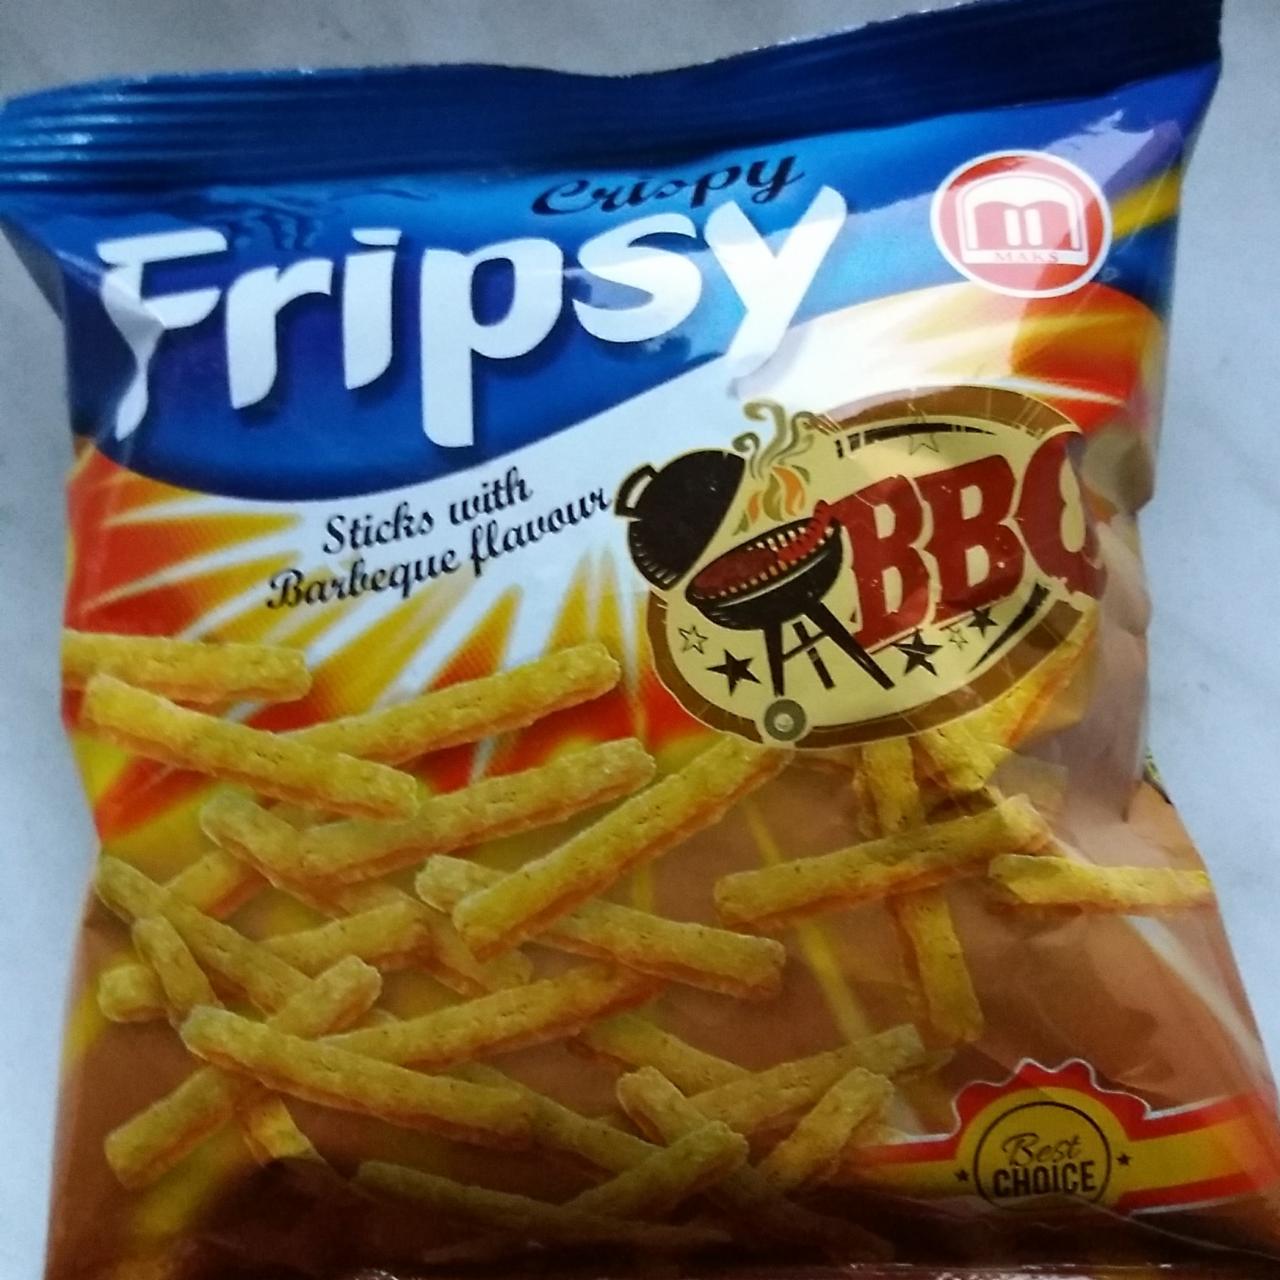 Fotografie - Crispy Fripsy Sticks with Barbeque flavour Maks